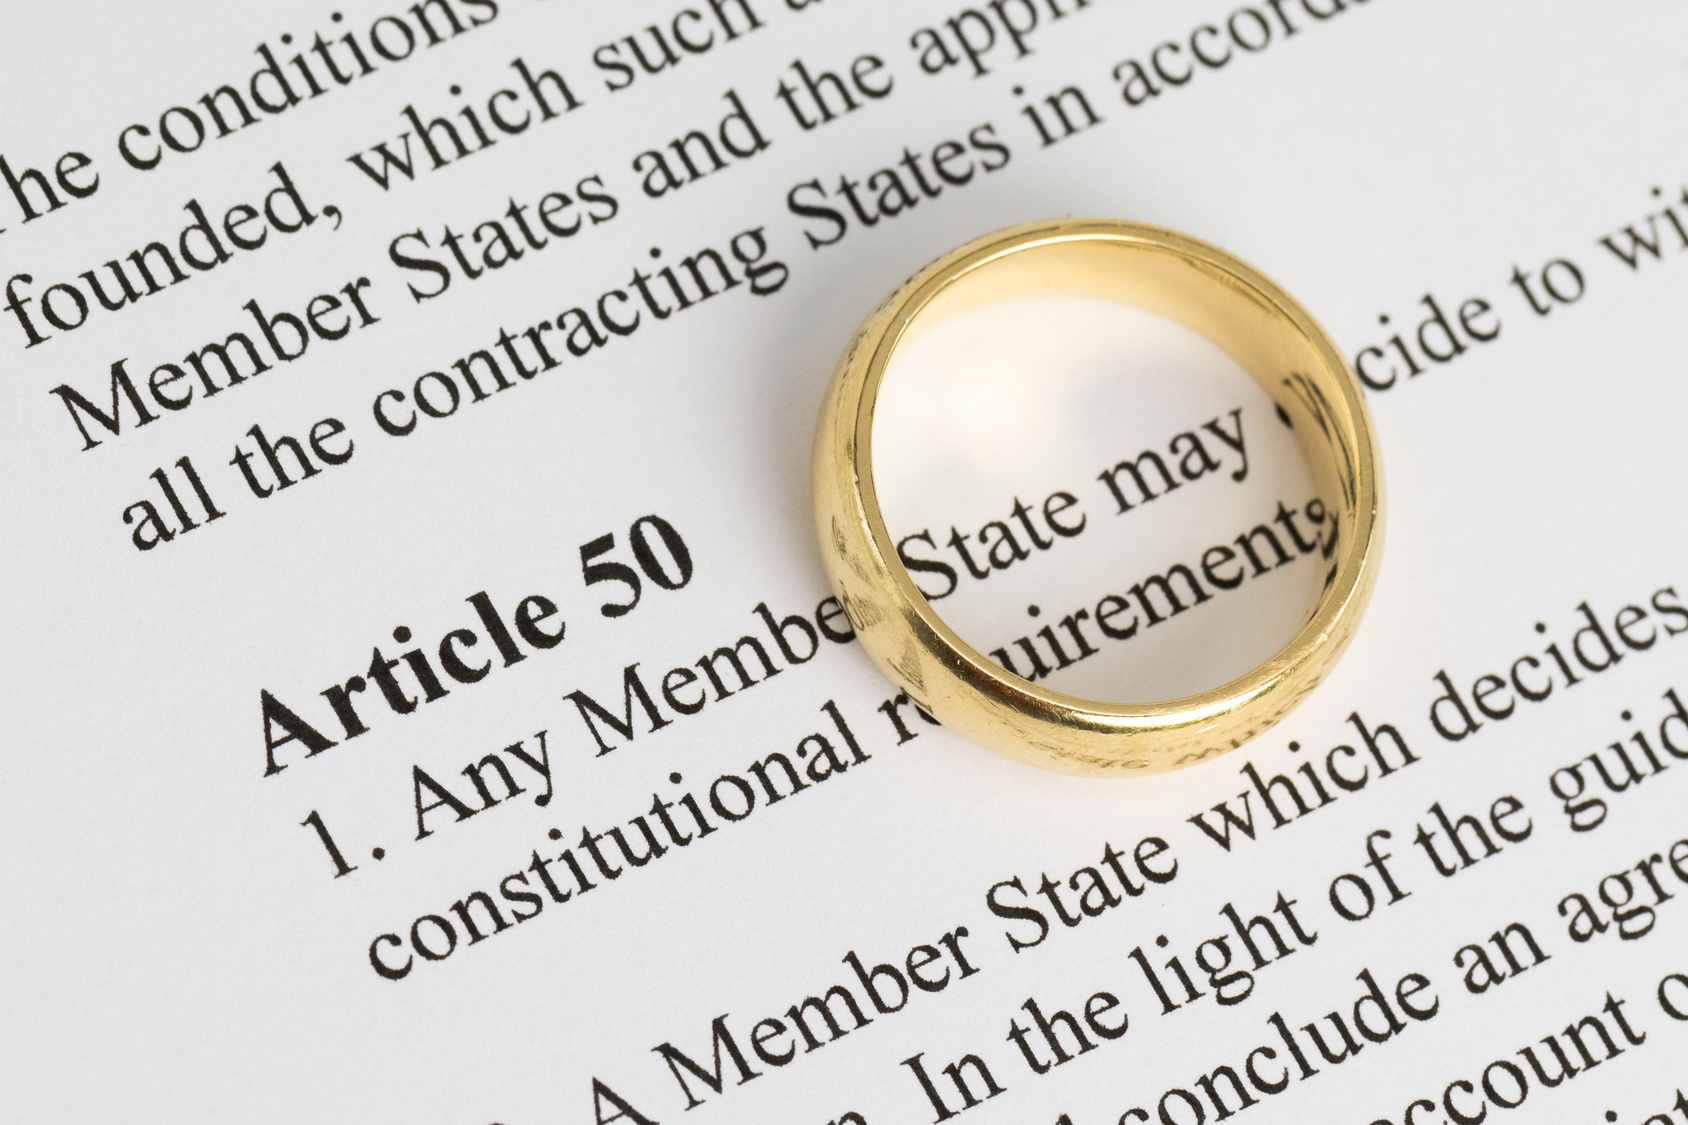 Article 50 extract with wedding ring